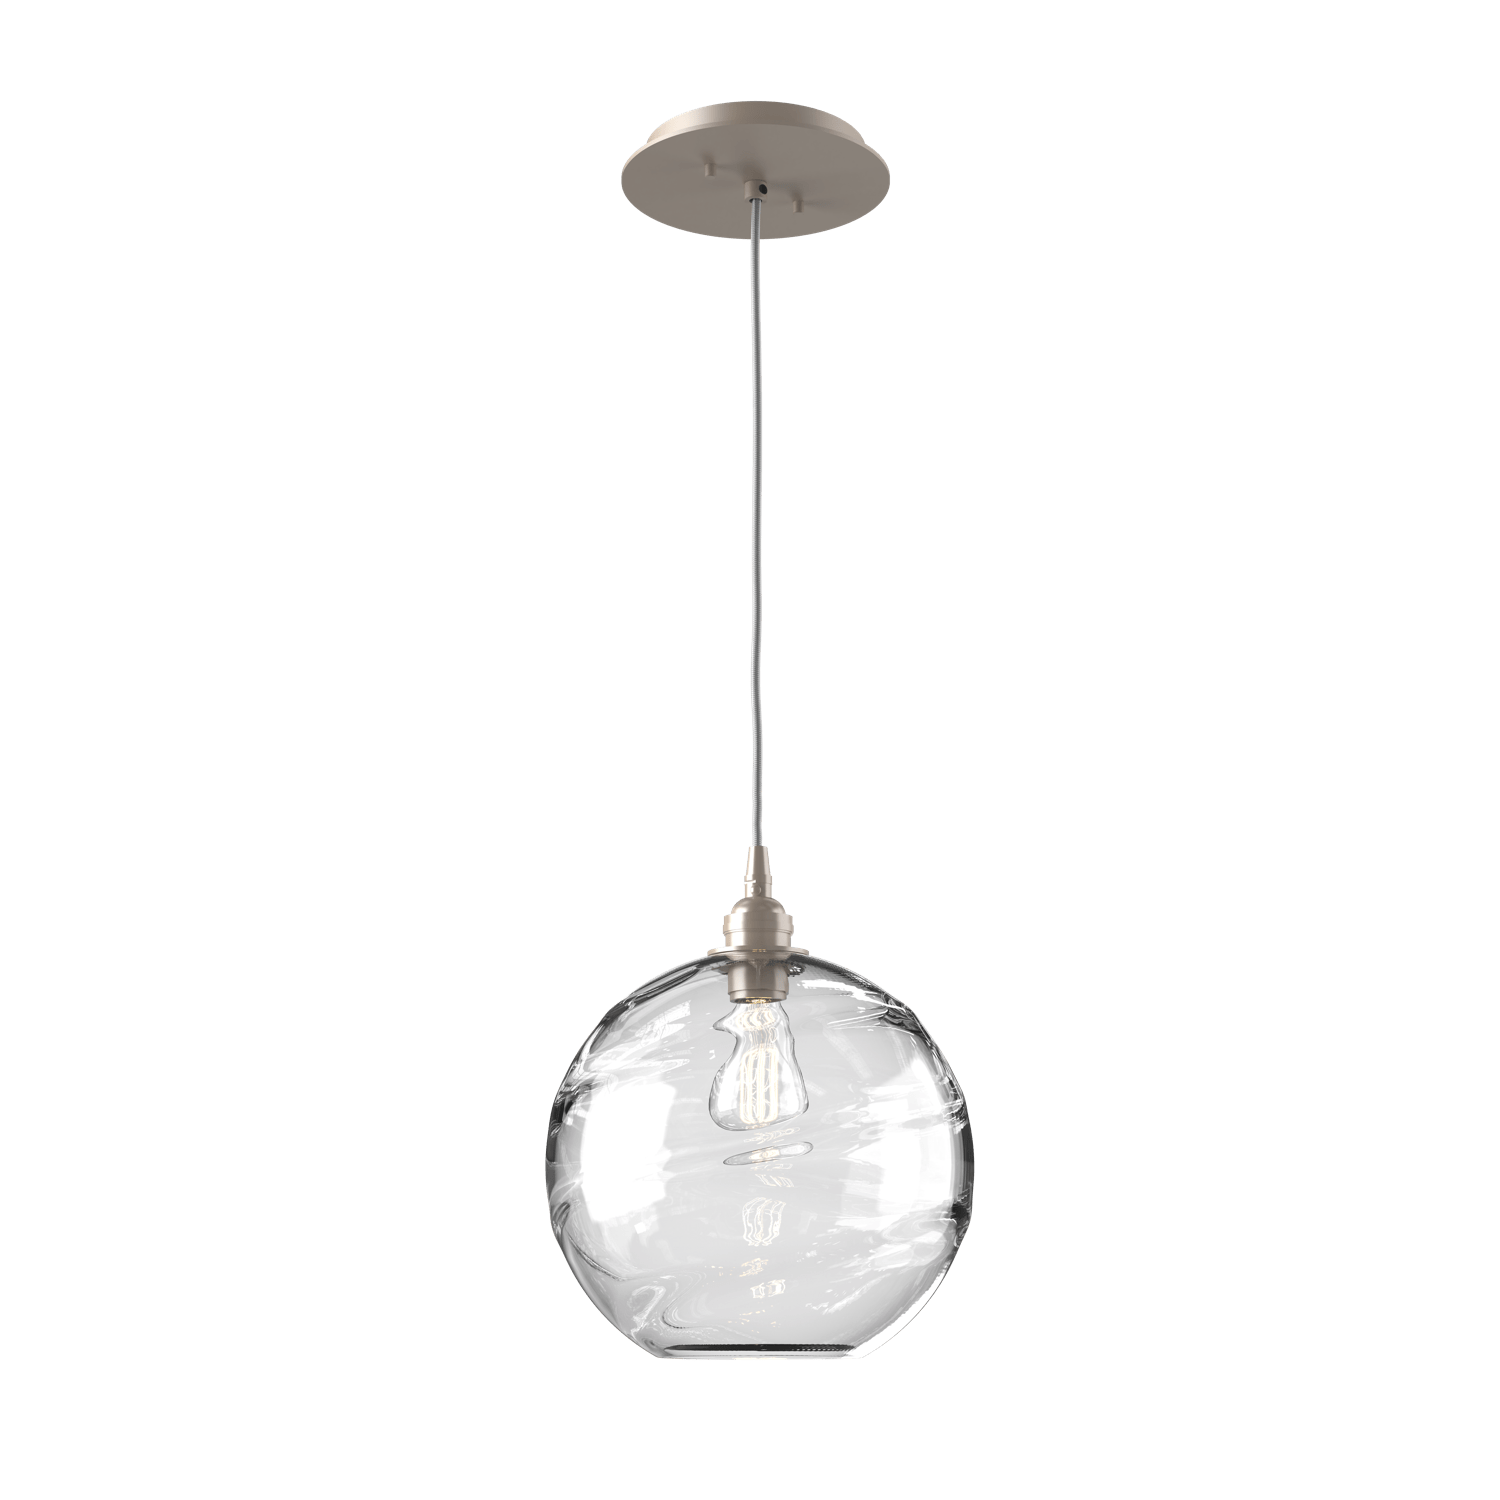 LAB0047-01-BS-OC-Hammerton-Studio-Optic-Blown-Glass-Terra-pendant-light-with-metallic-beige-silver-finish-and-optic-clear-blown-glass-shades-and-incandescent-lamping